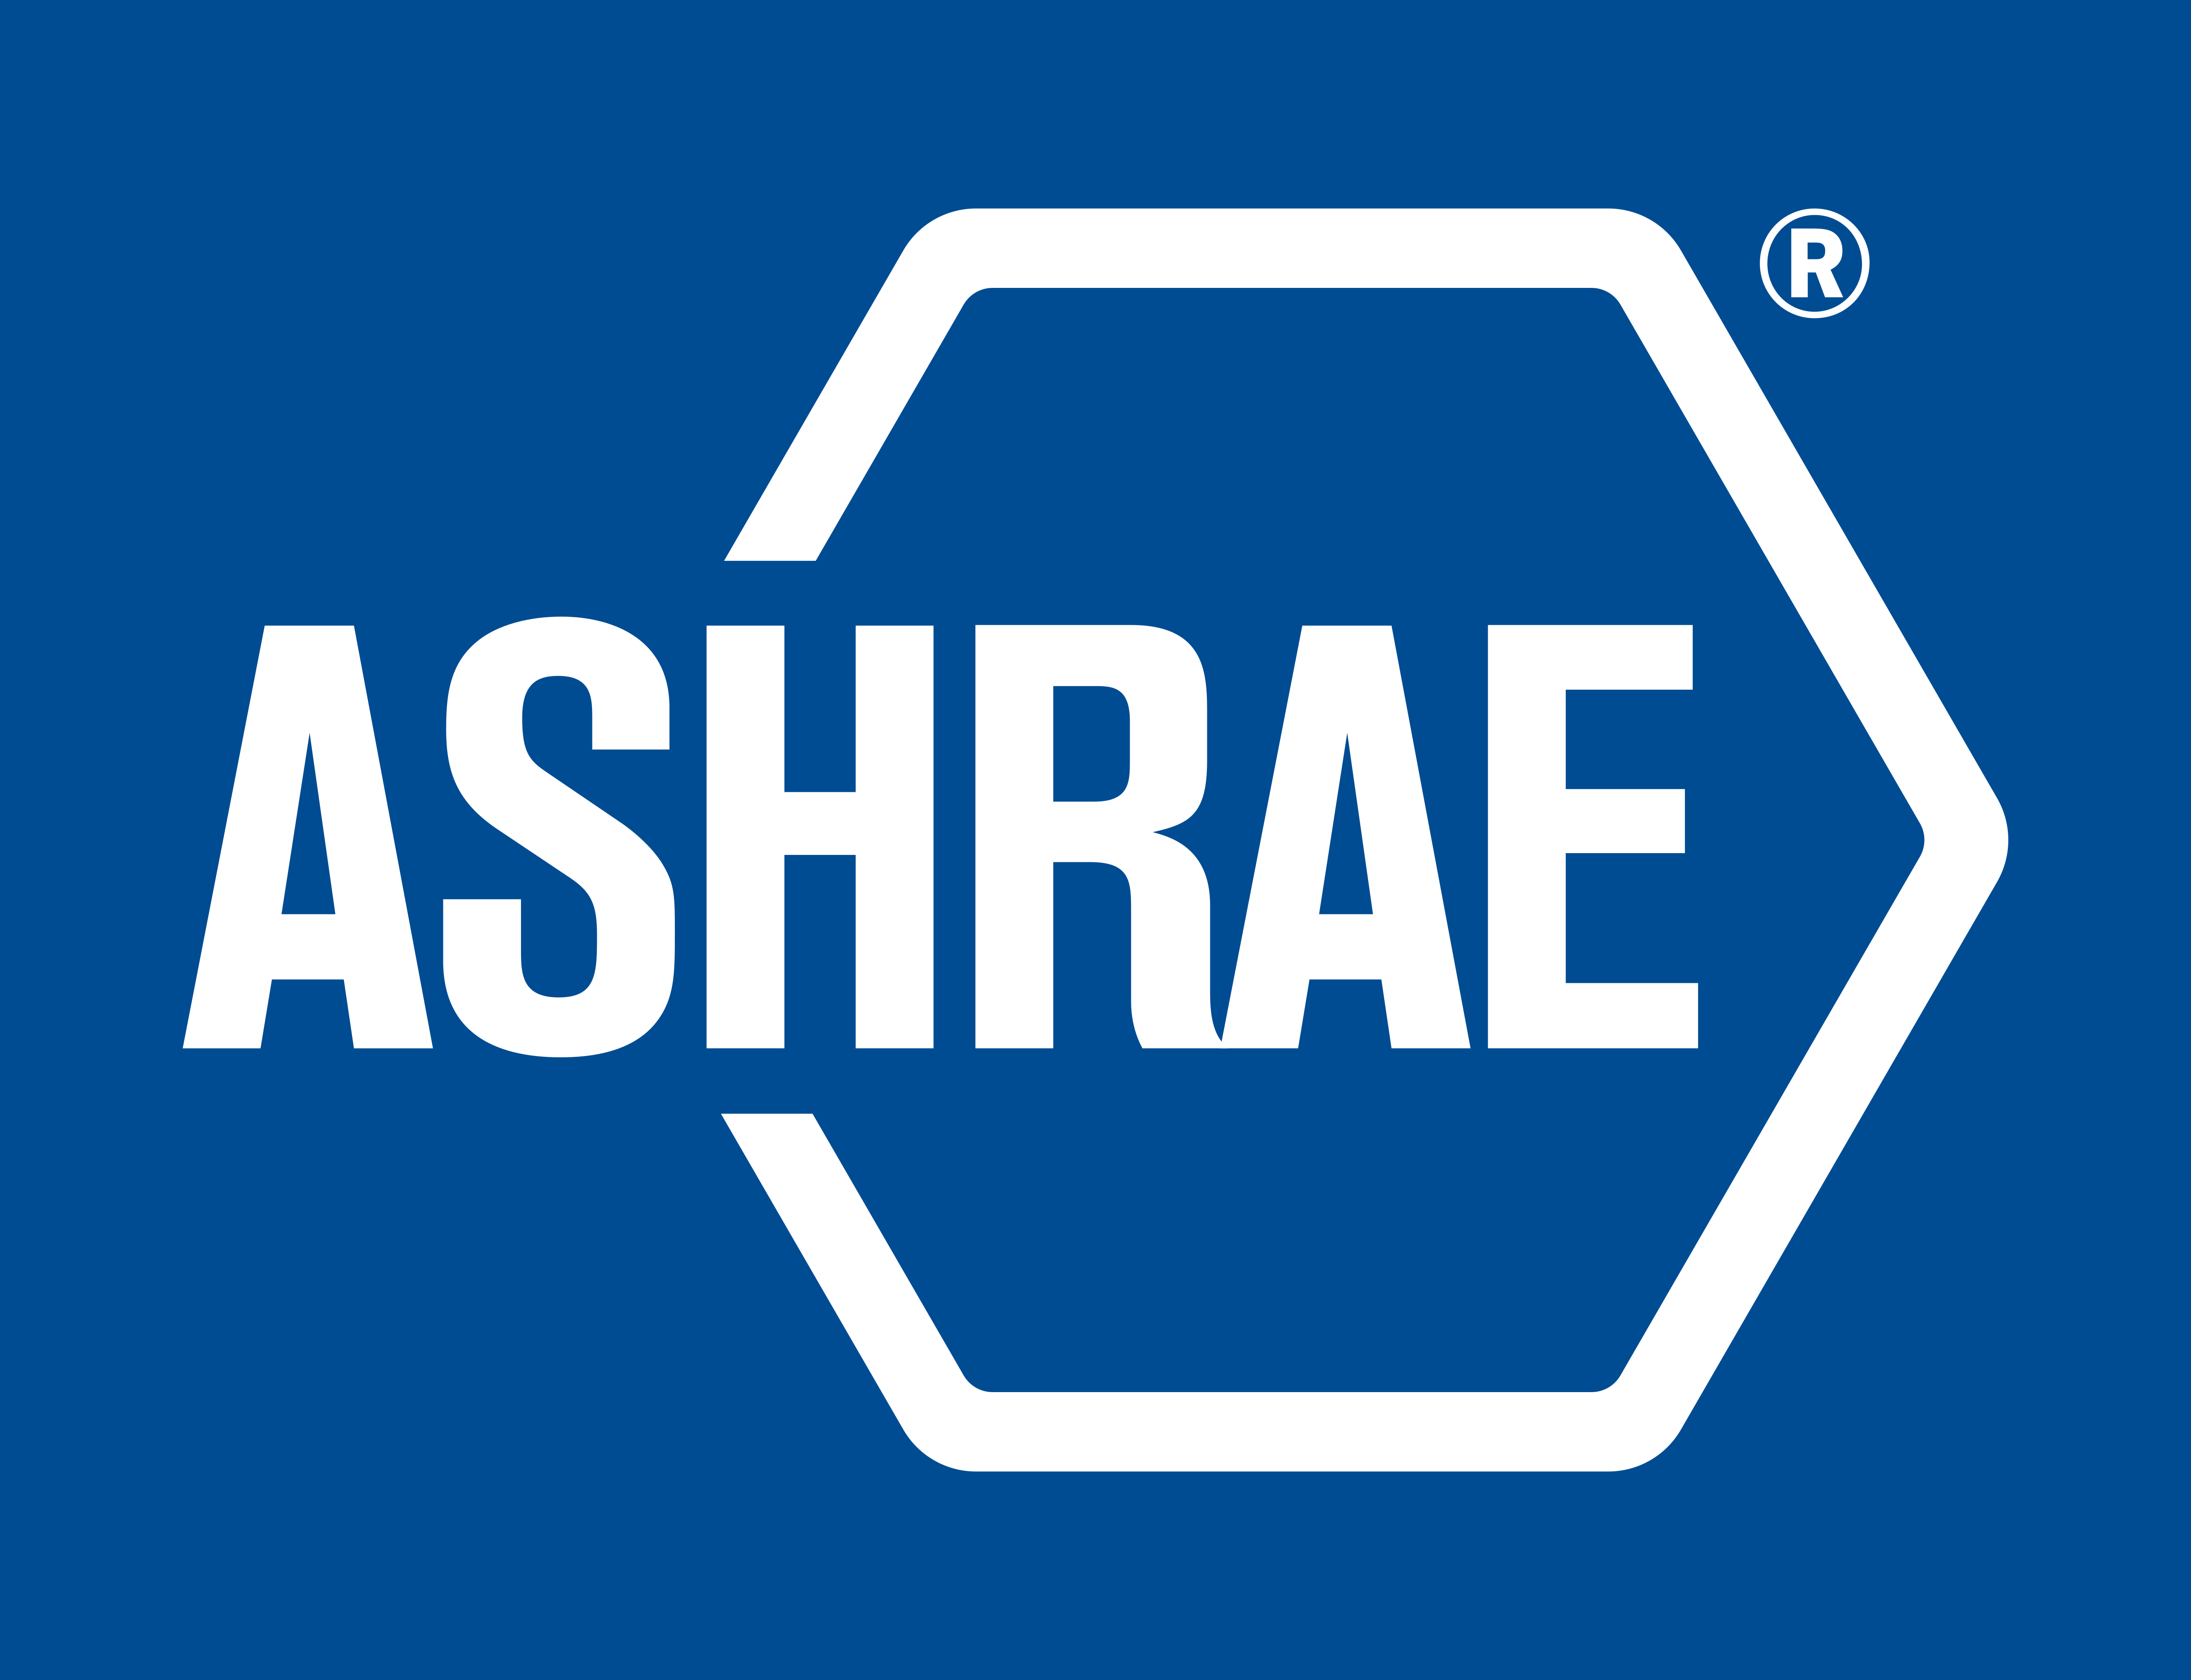 Smart Buildings and Digital Engineering MSc students create their own ASHRAE  branch | UCL Institute for Environmental Design and Engineering - UCL –  University College London